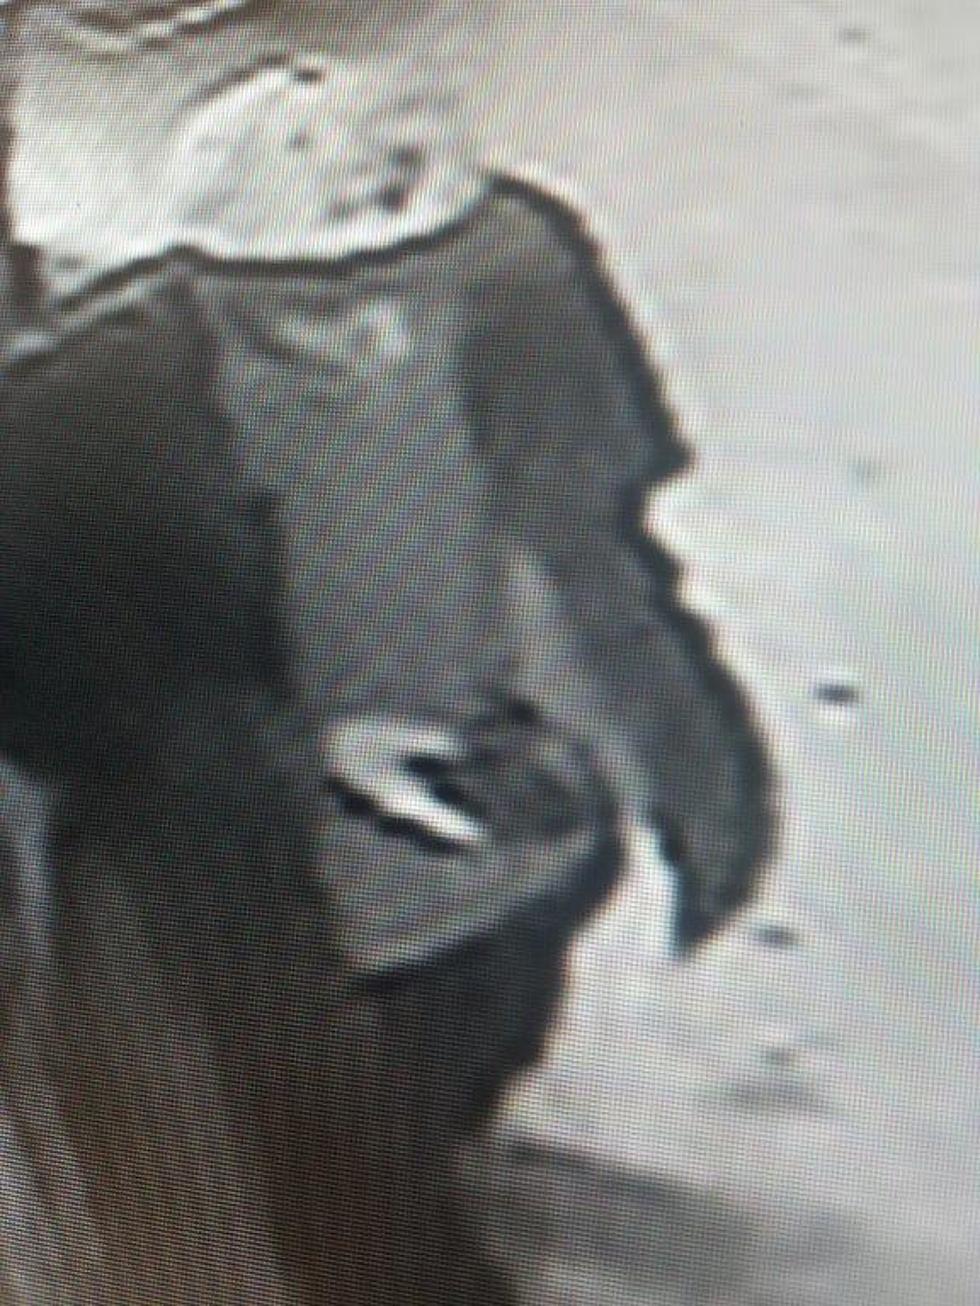 Police Search For Pizza Place Robbery Suspect